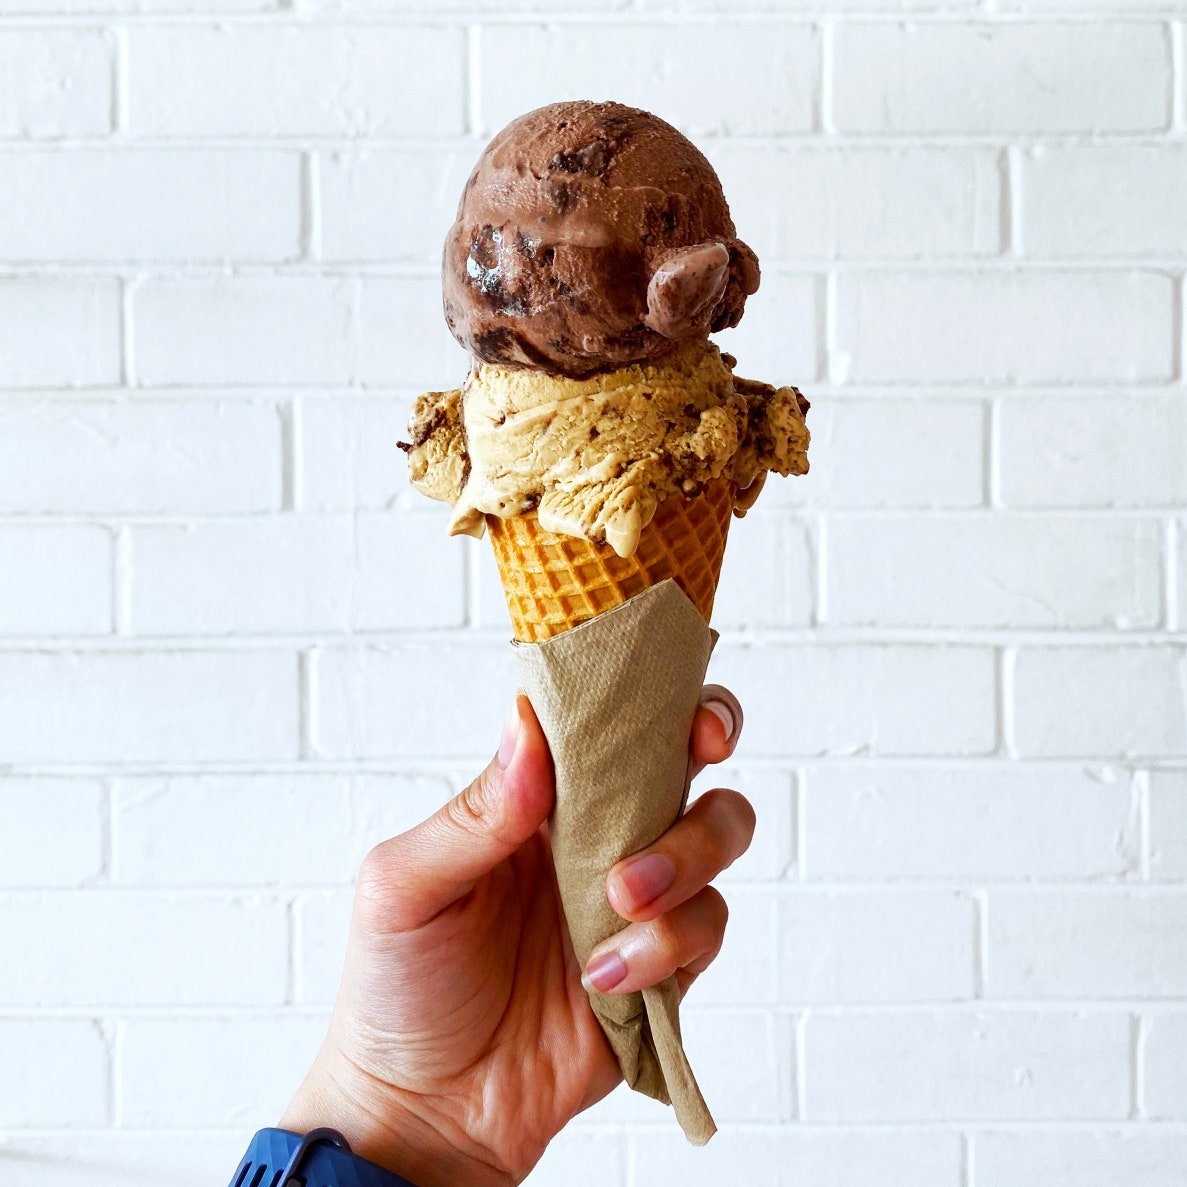 7 Barcelona Ice Cream Shops to Bookmark for Your Next Trip